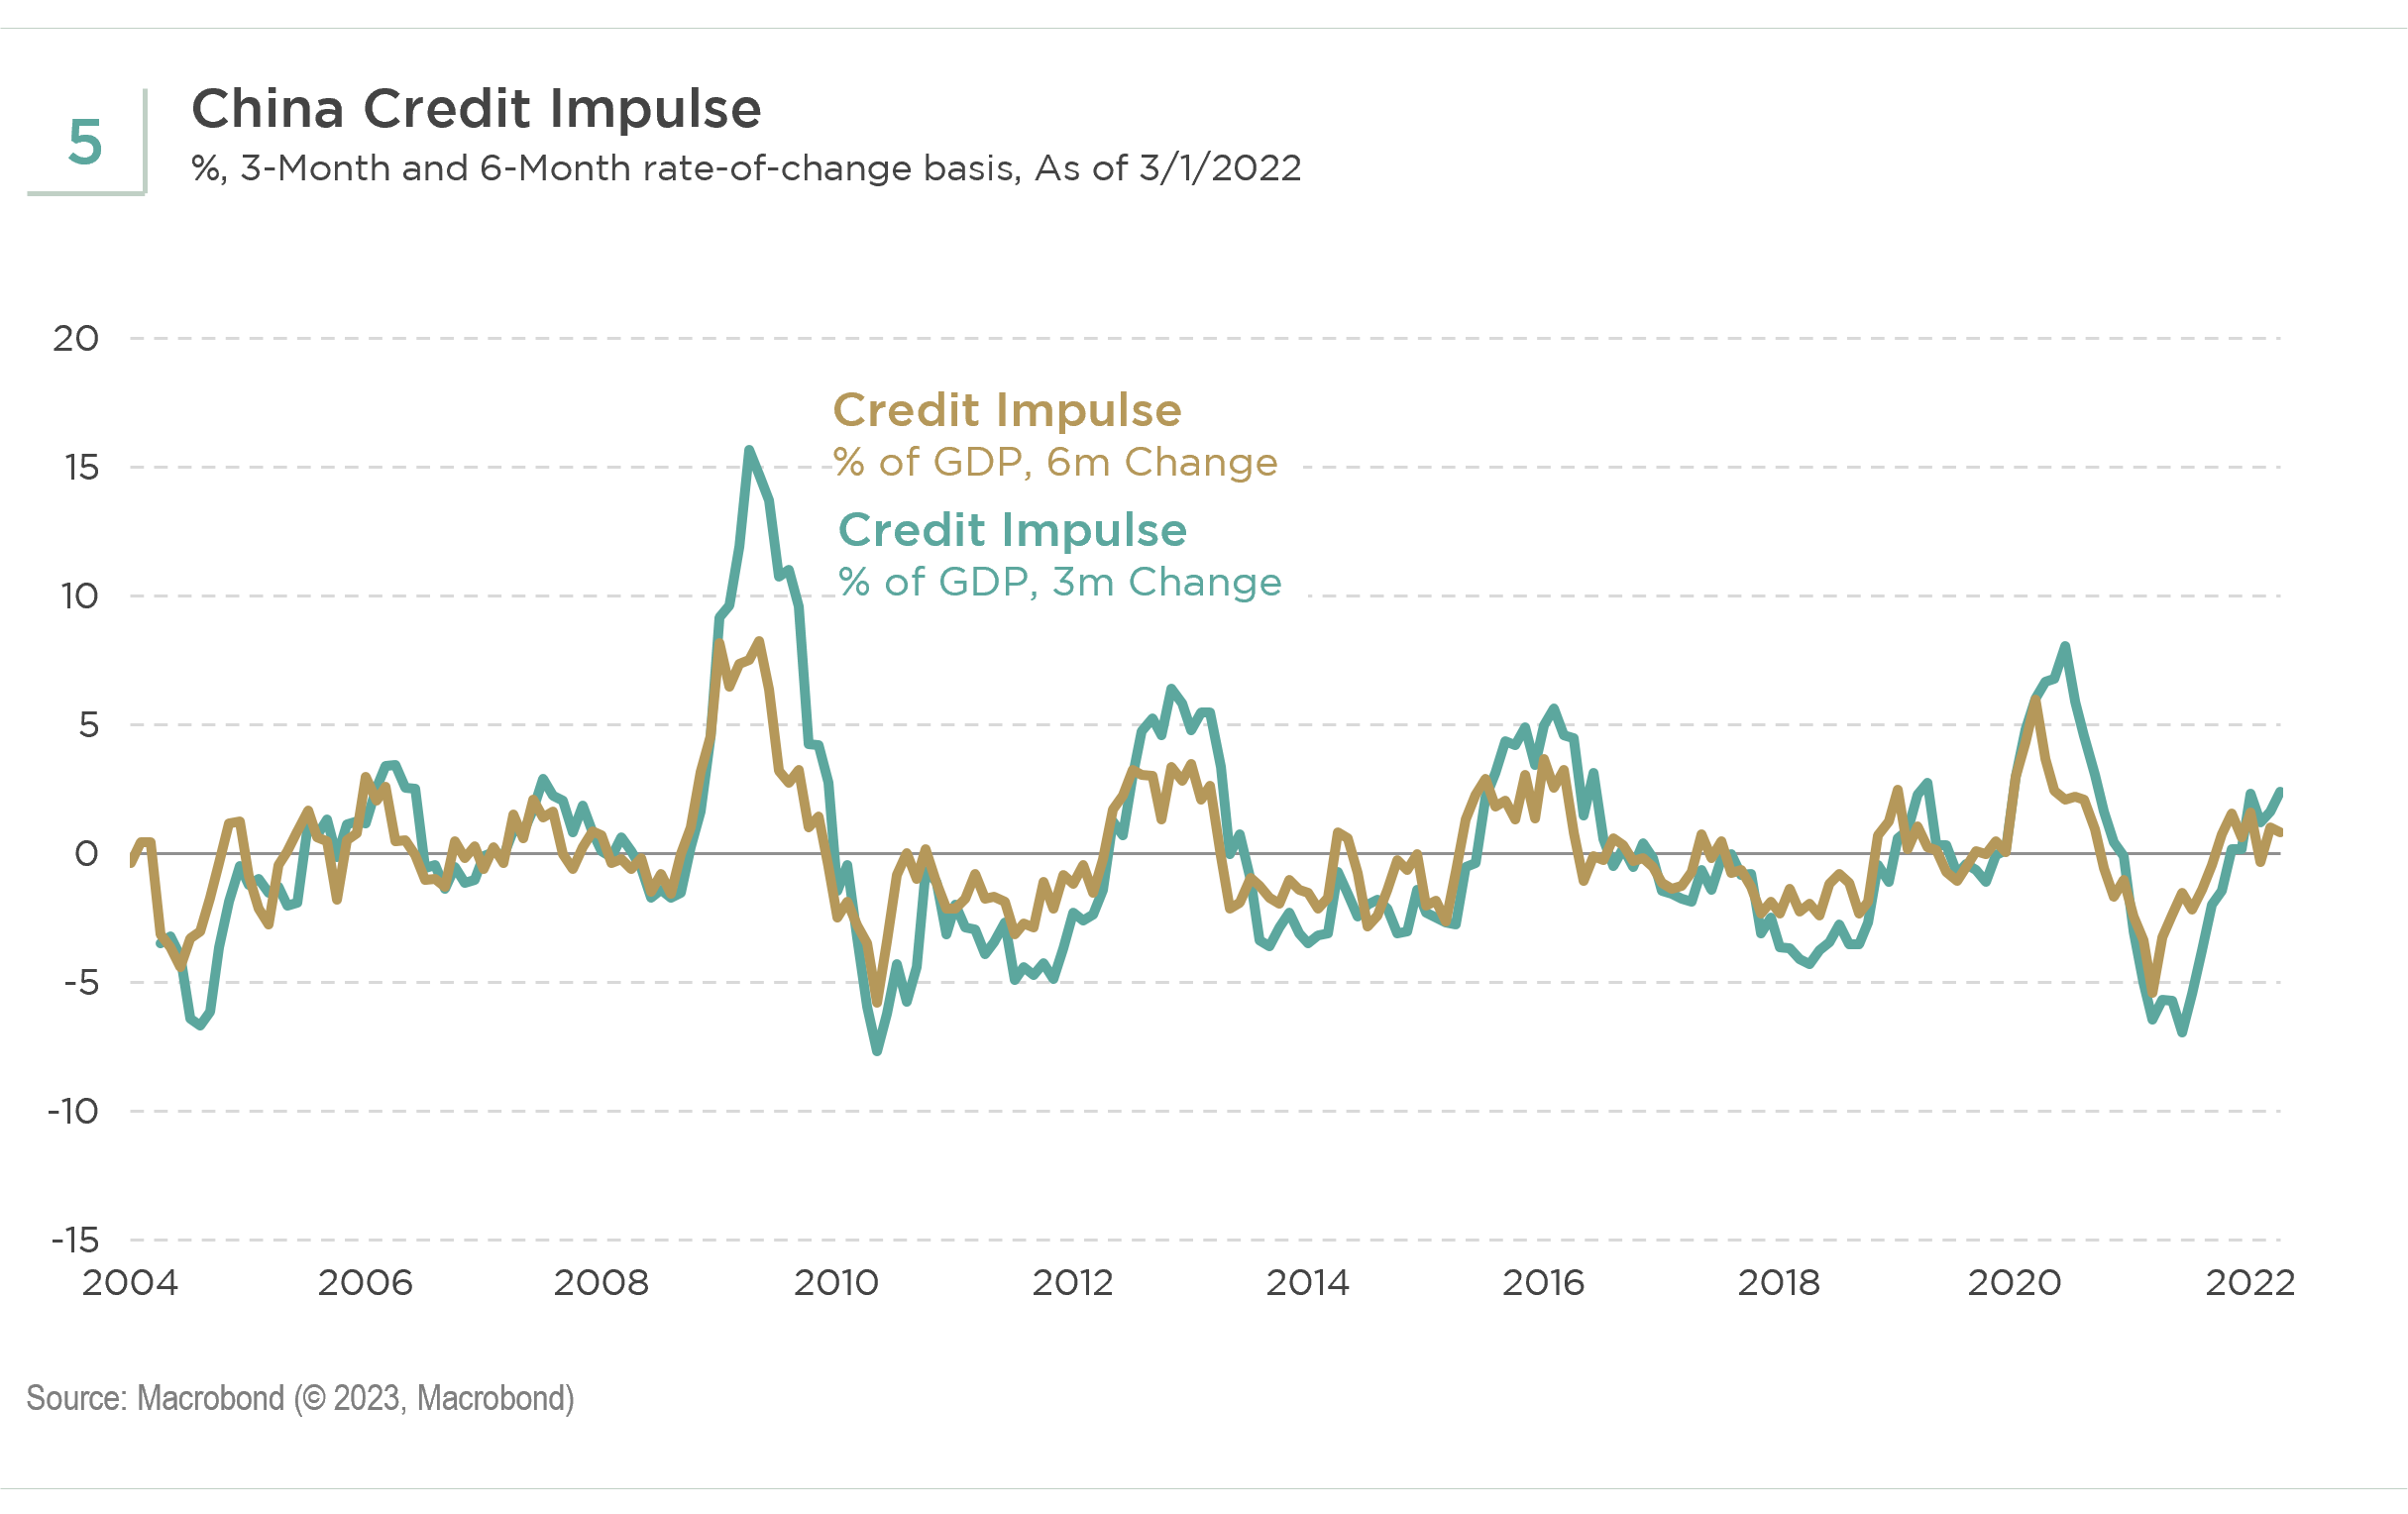 Exhibit 5: Credit Impulse On A 3m and 6m Rate of Change Basis